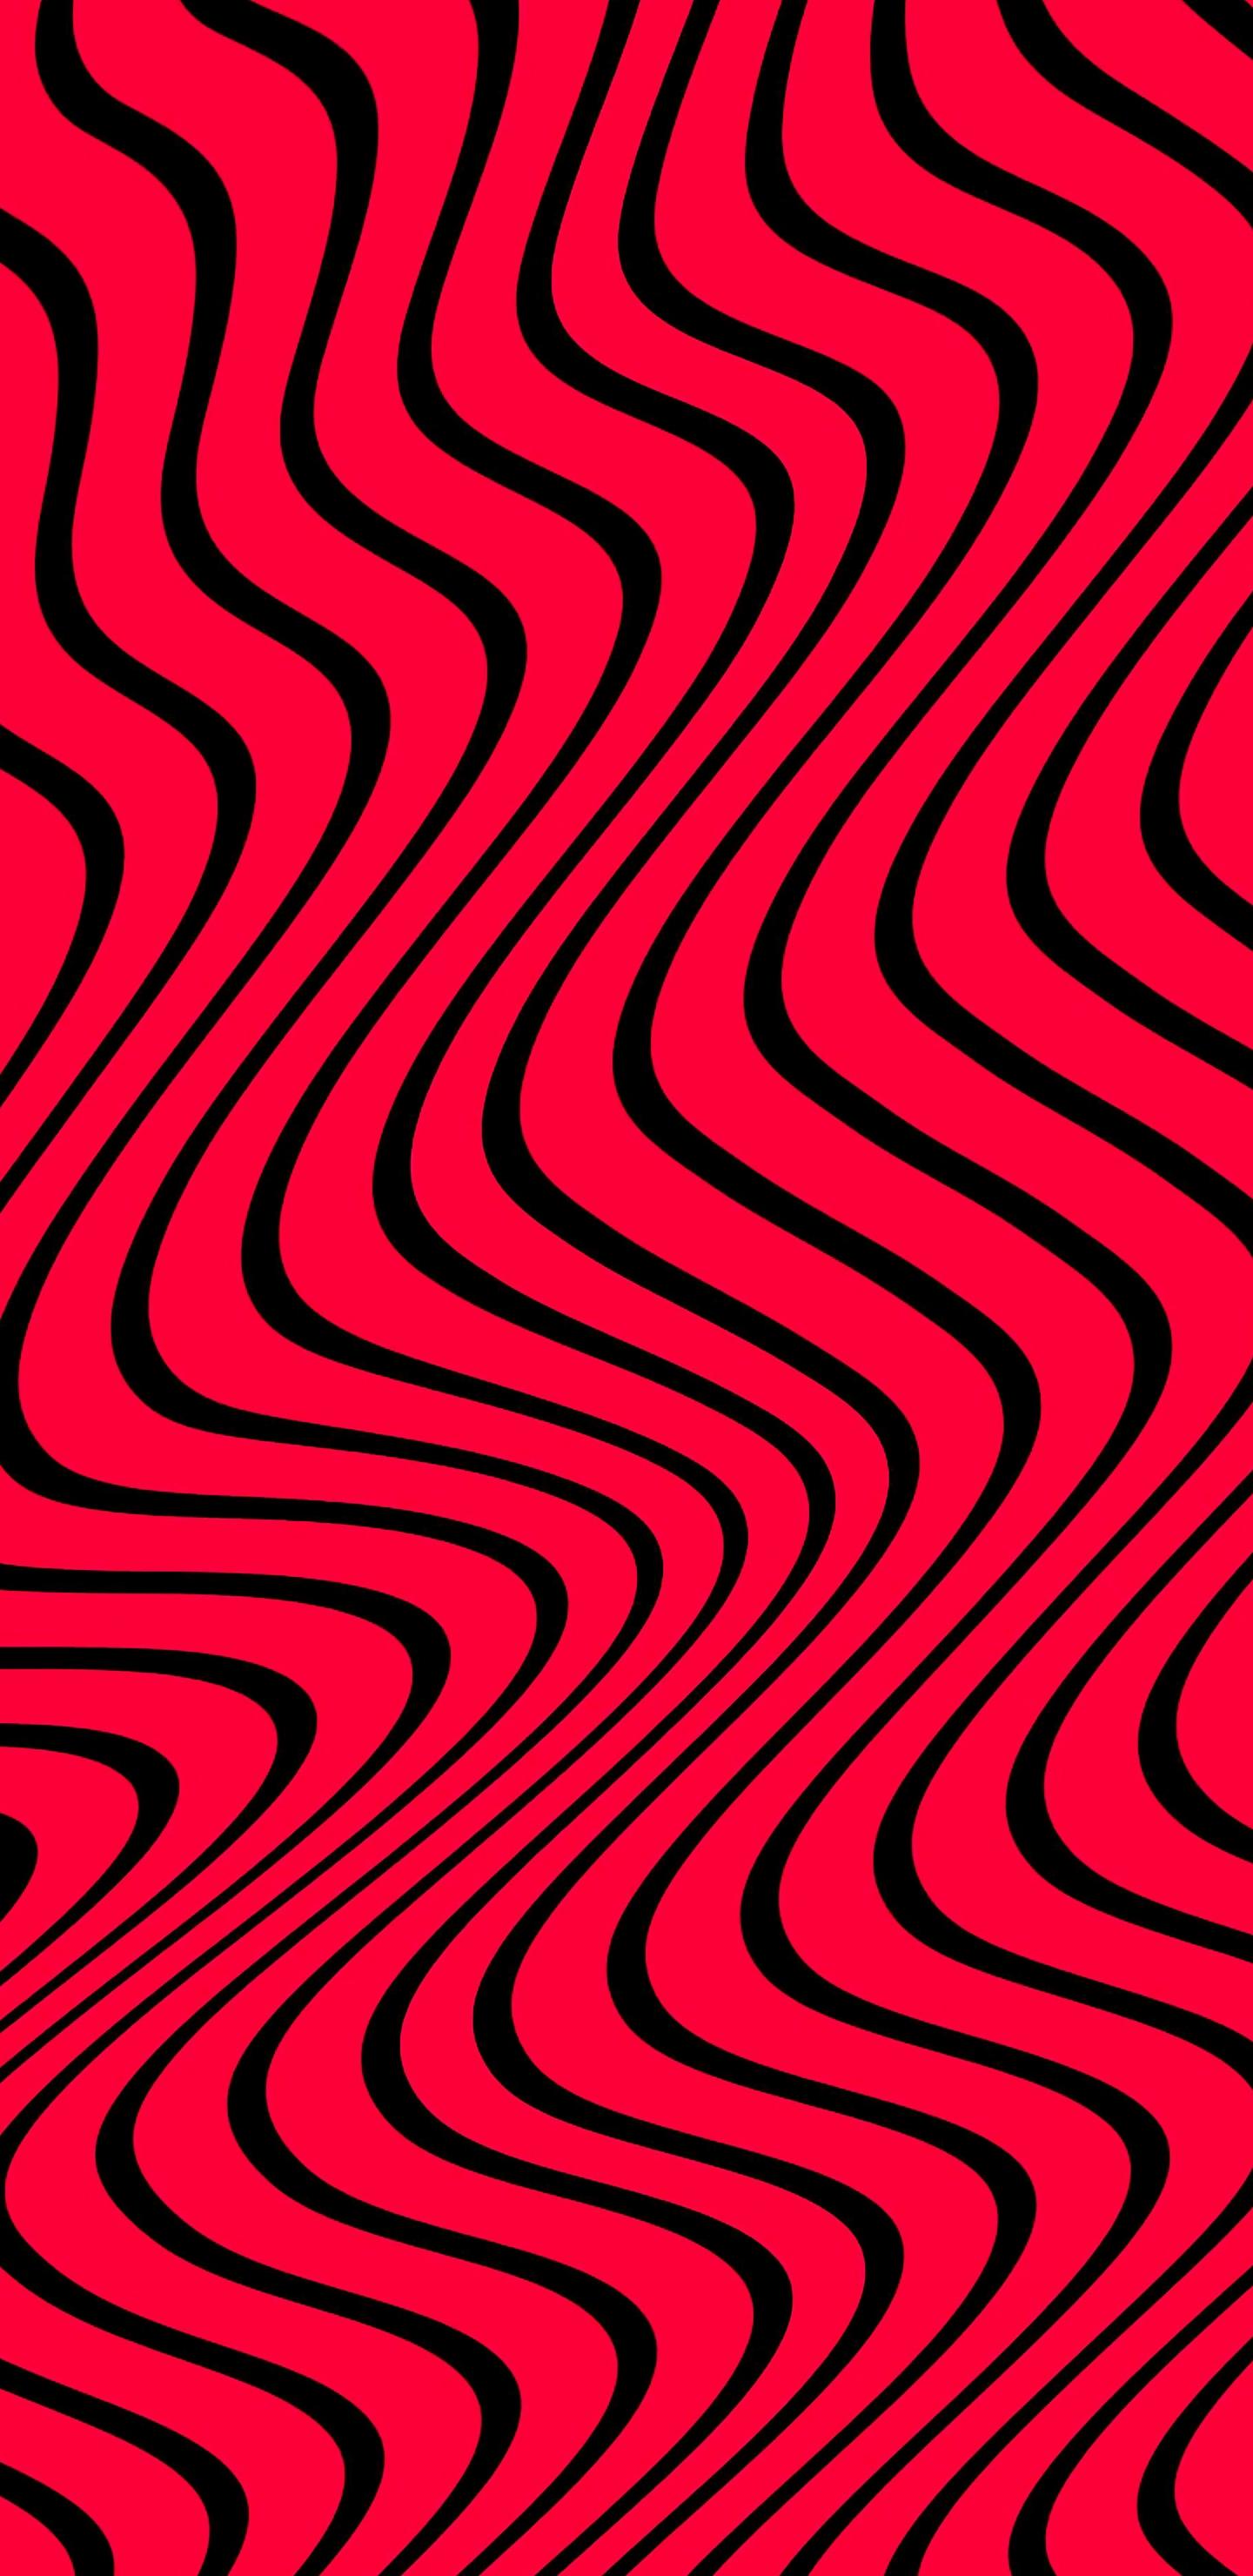 Pewdiepie Background Posted By Zoey Mercado